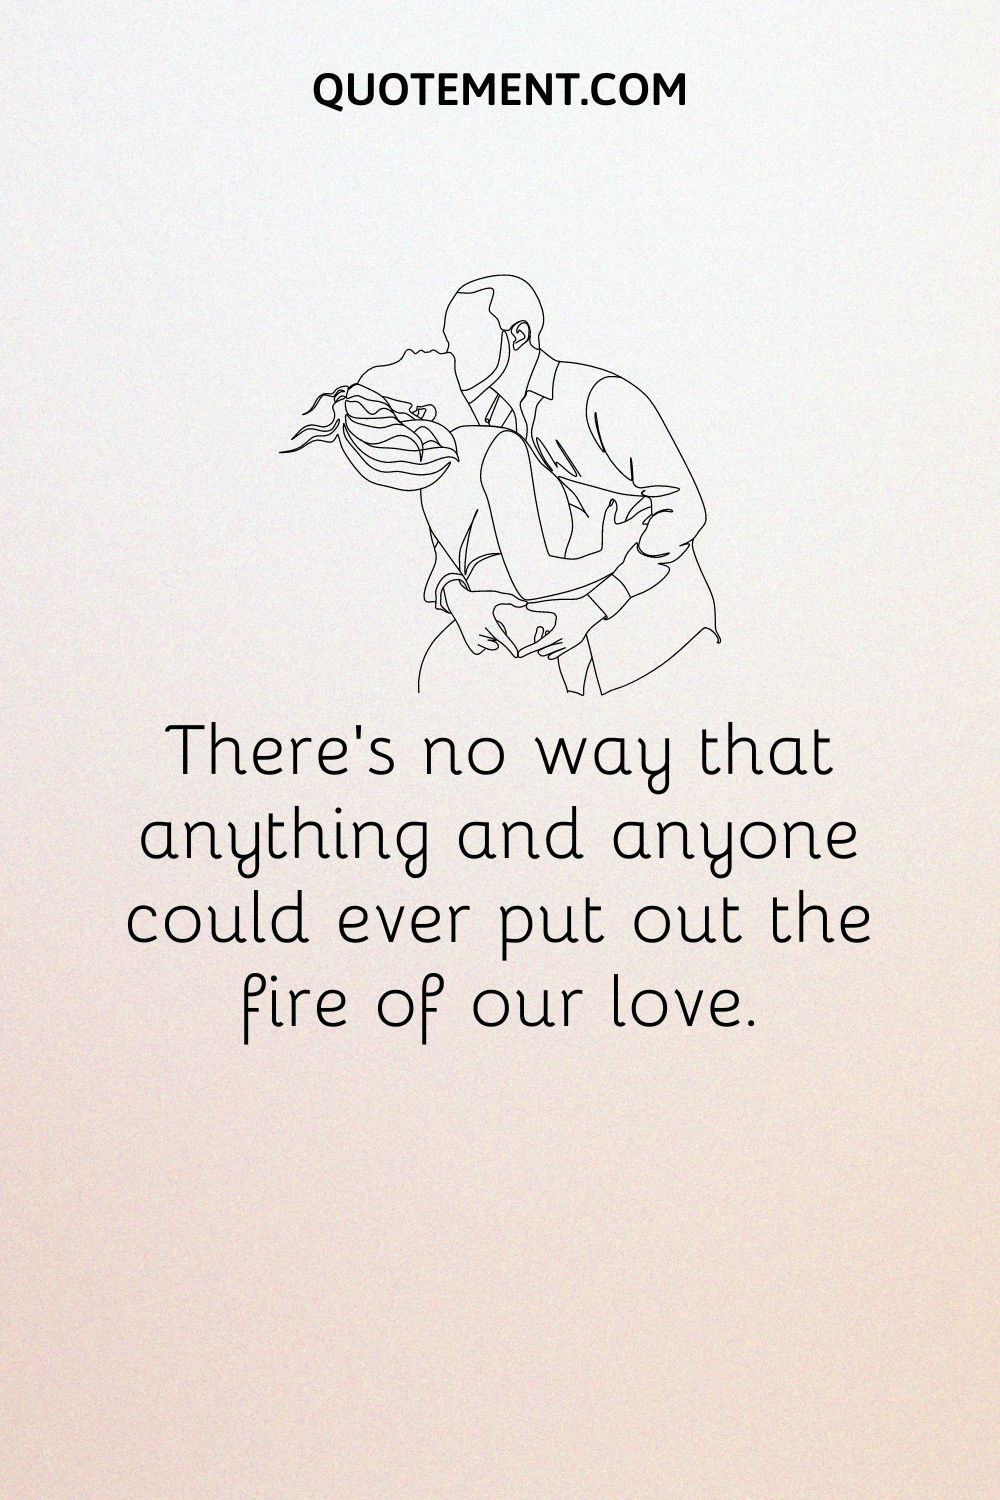 There’s no way that anything and anyone could ever put out the fire of our love